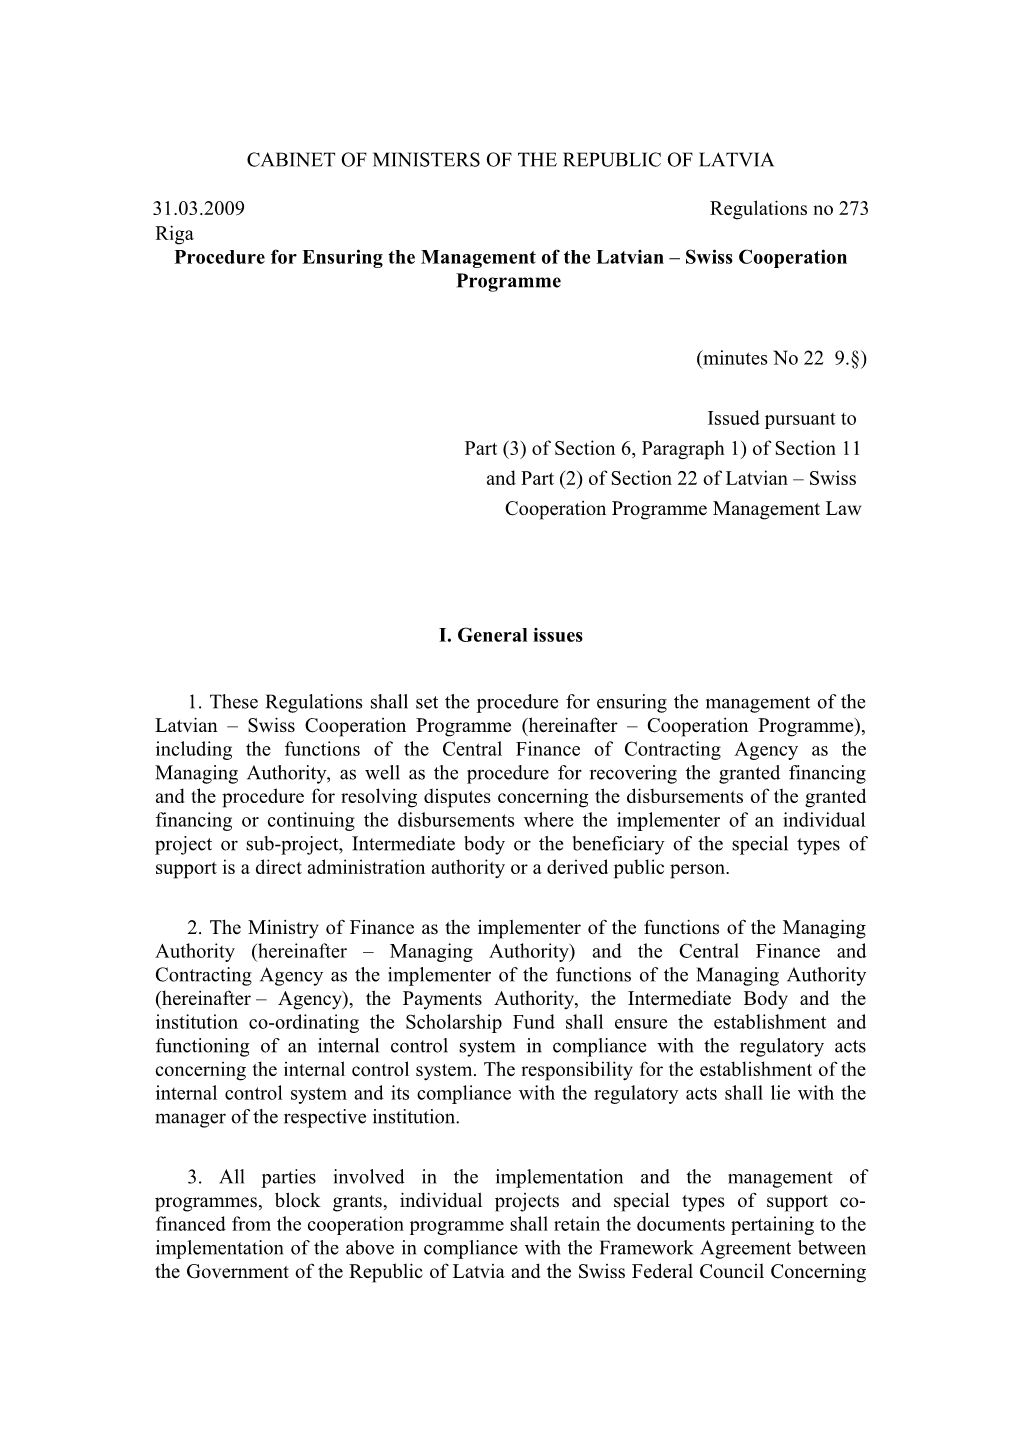 Procedure for Ensuring the Management of the Latvian Swiss Cooperation Programme